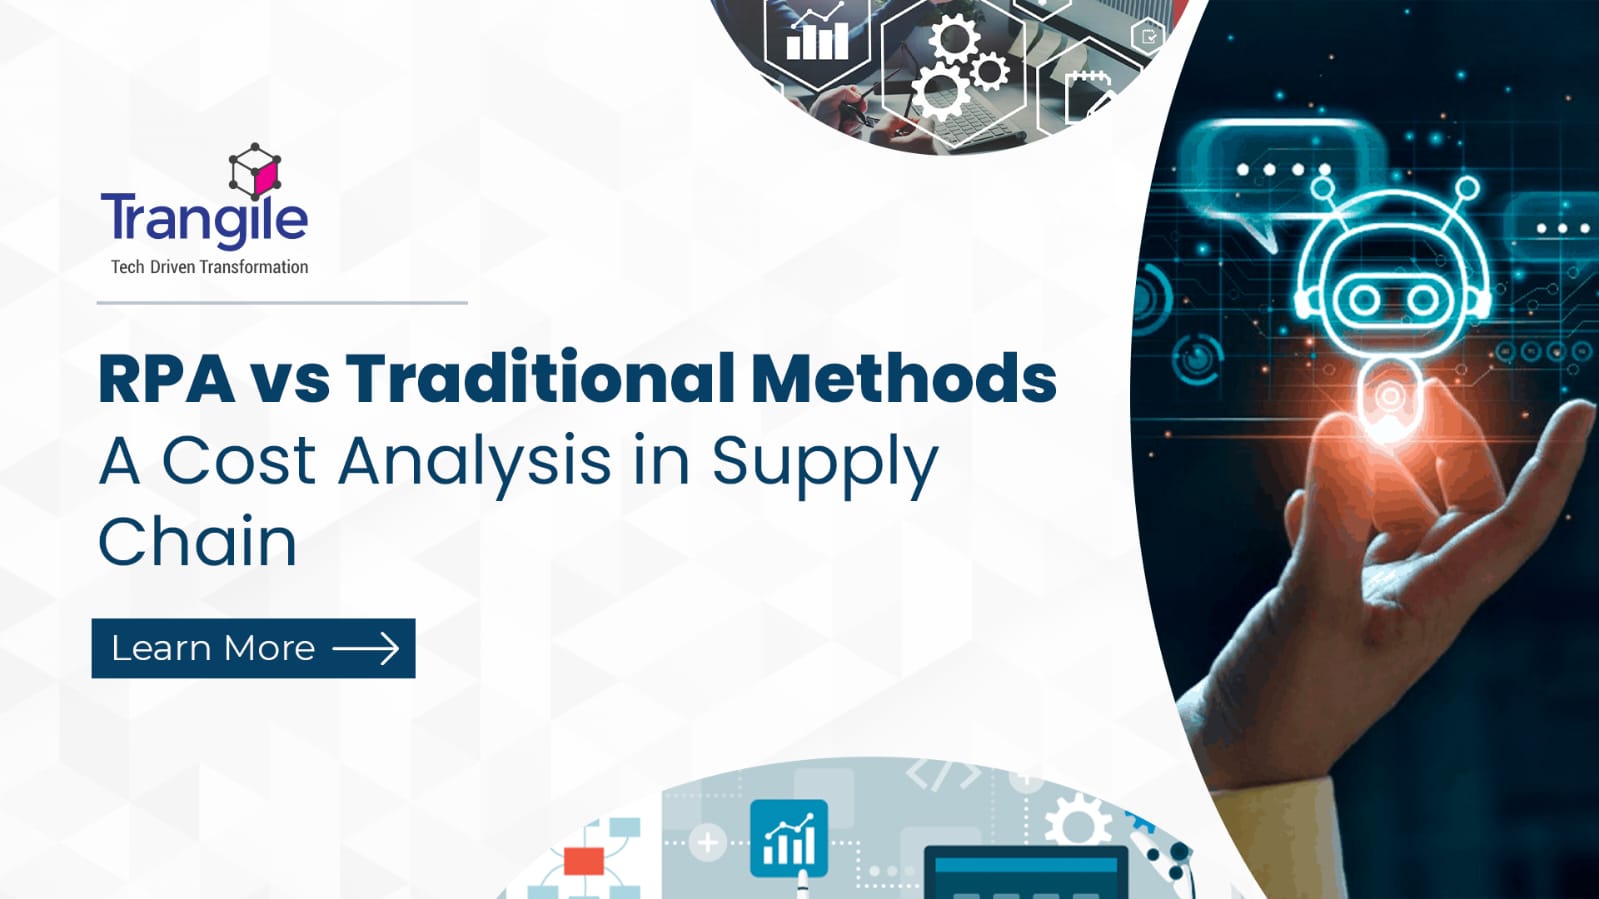 RPA vs. Traditional Methods: A Cost Analysis in Supply Chain